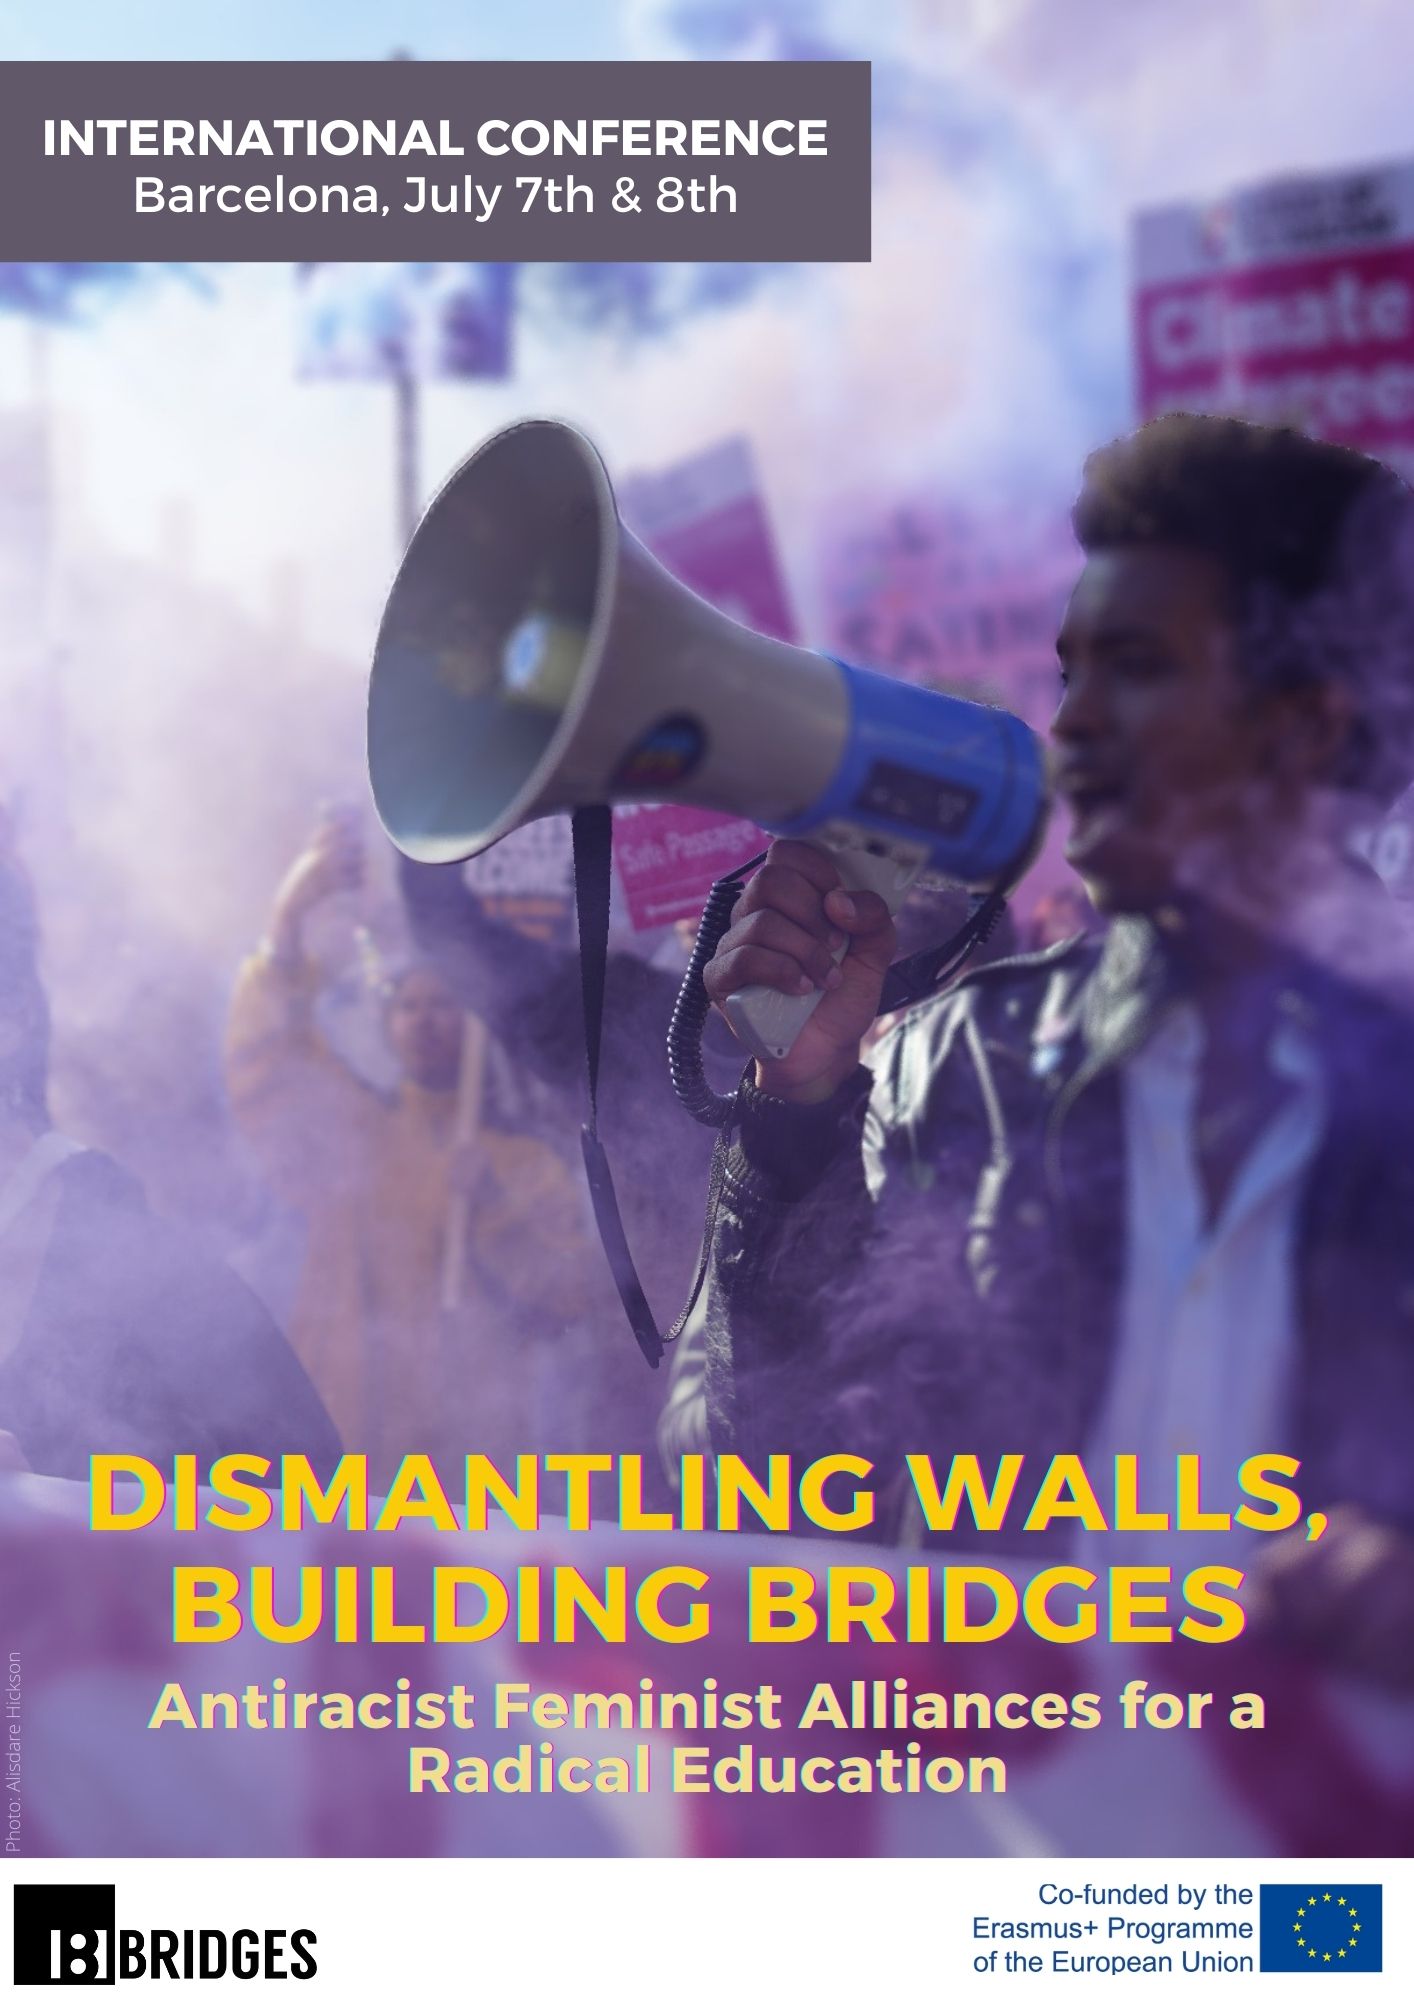 You are currently viewing BRIDGES International Conference: “Dismantling Walls, Building Bridges: Feminist Anti-racist Alliances for a Radical Education”, 7th & 8th July, Barcelona